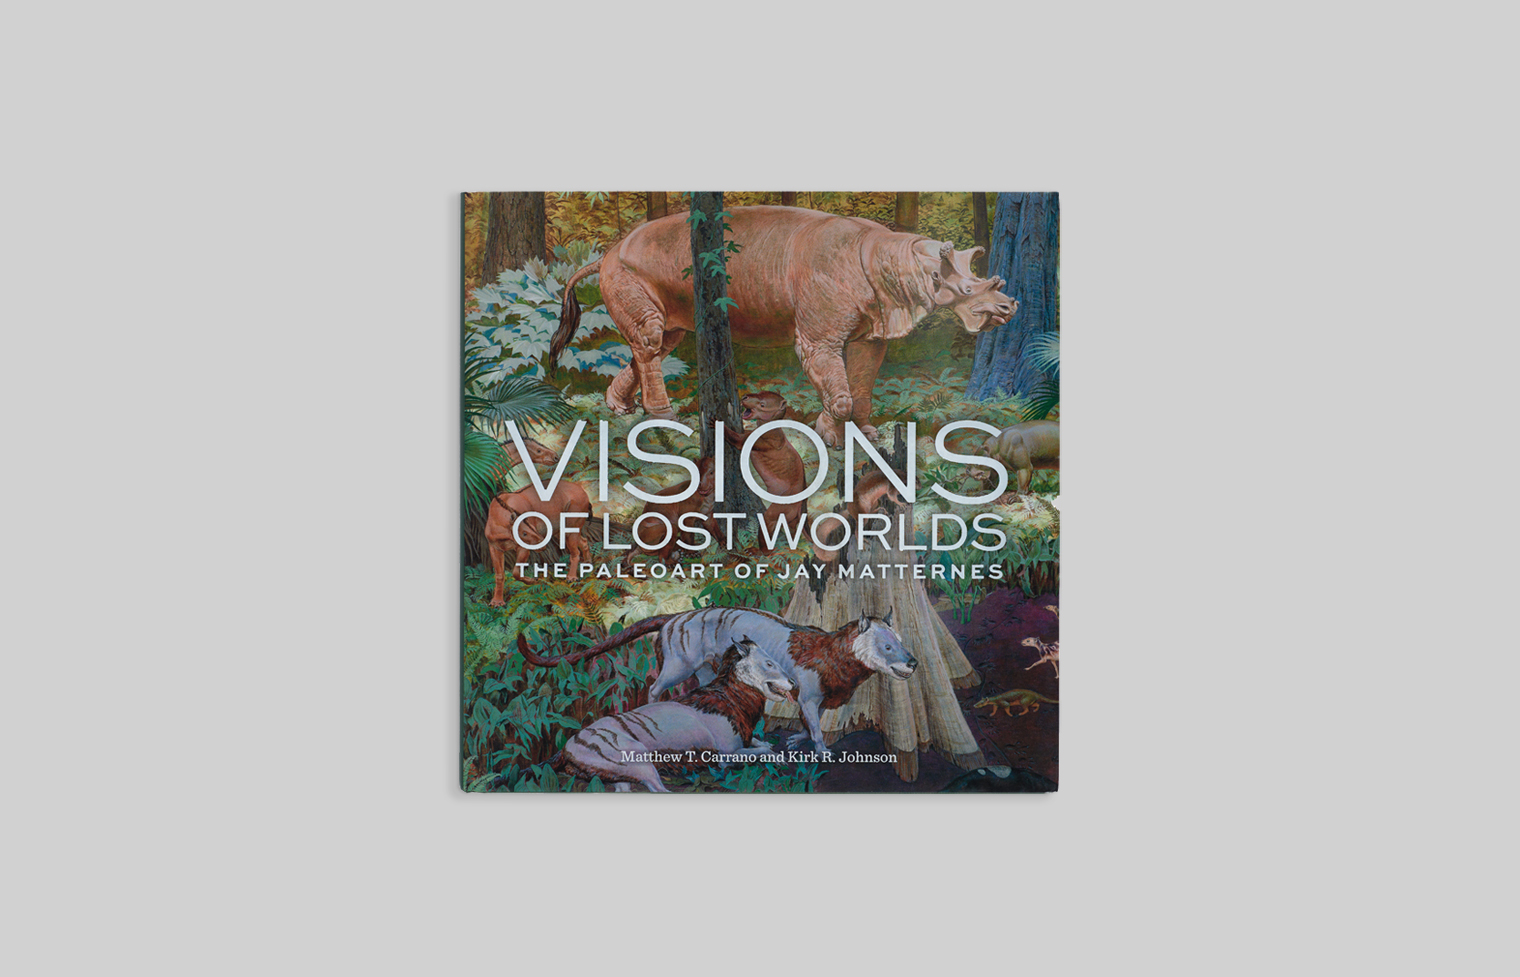 The cover features a detail from a Matternes mural of a Wyoming rainforest populated with animals imagined from the early to middle Eocene period.